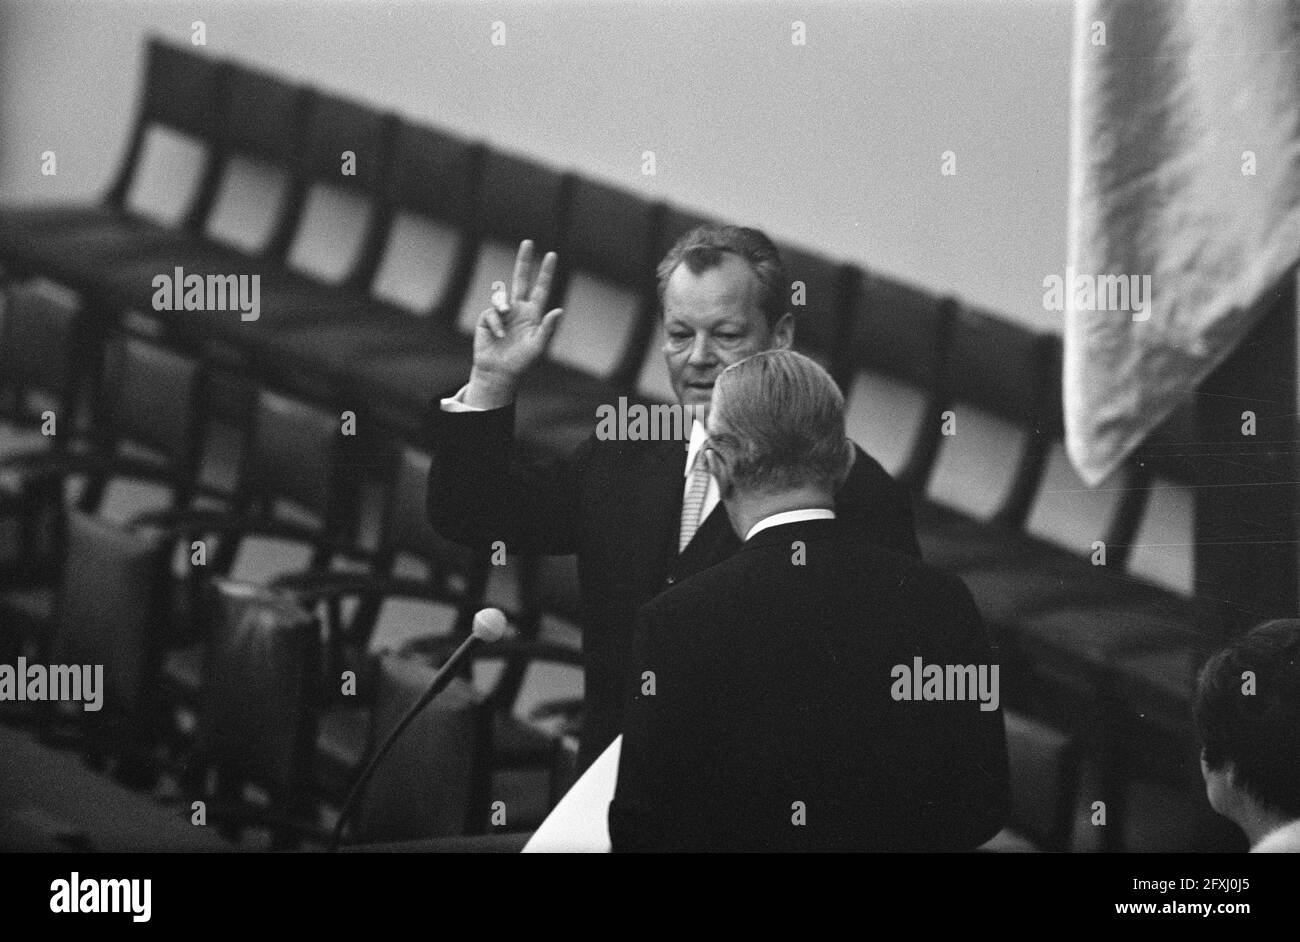 Willy Brandt (SPD) elected Chancellor of West Germany in Bonn. President of Bundestag of Hassel, Willy Brandt takes the oath, October 21, 1969, BONDSDAY, Chancellors, Presidents, The Netherlands, 20th century press agency photo, news to remember, documentary, historic photography 1945-1990, visual stories, human history of the Twentieth Century, capturing moments in time Stock Photo